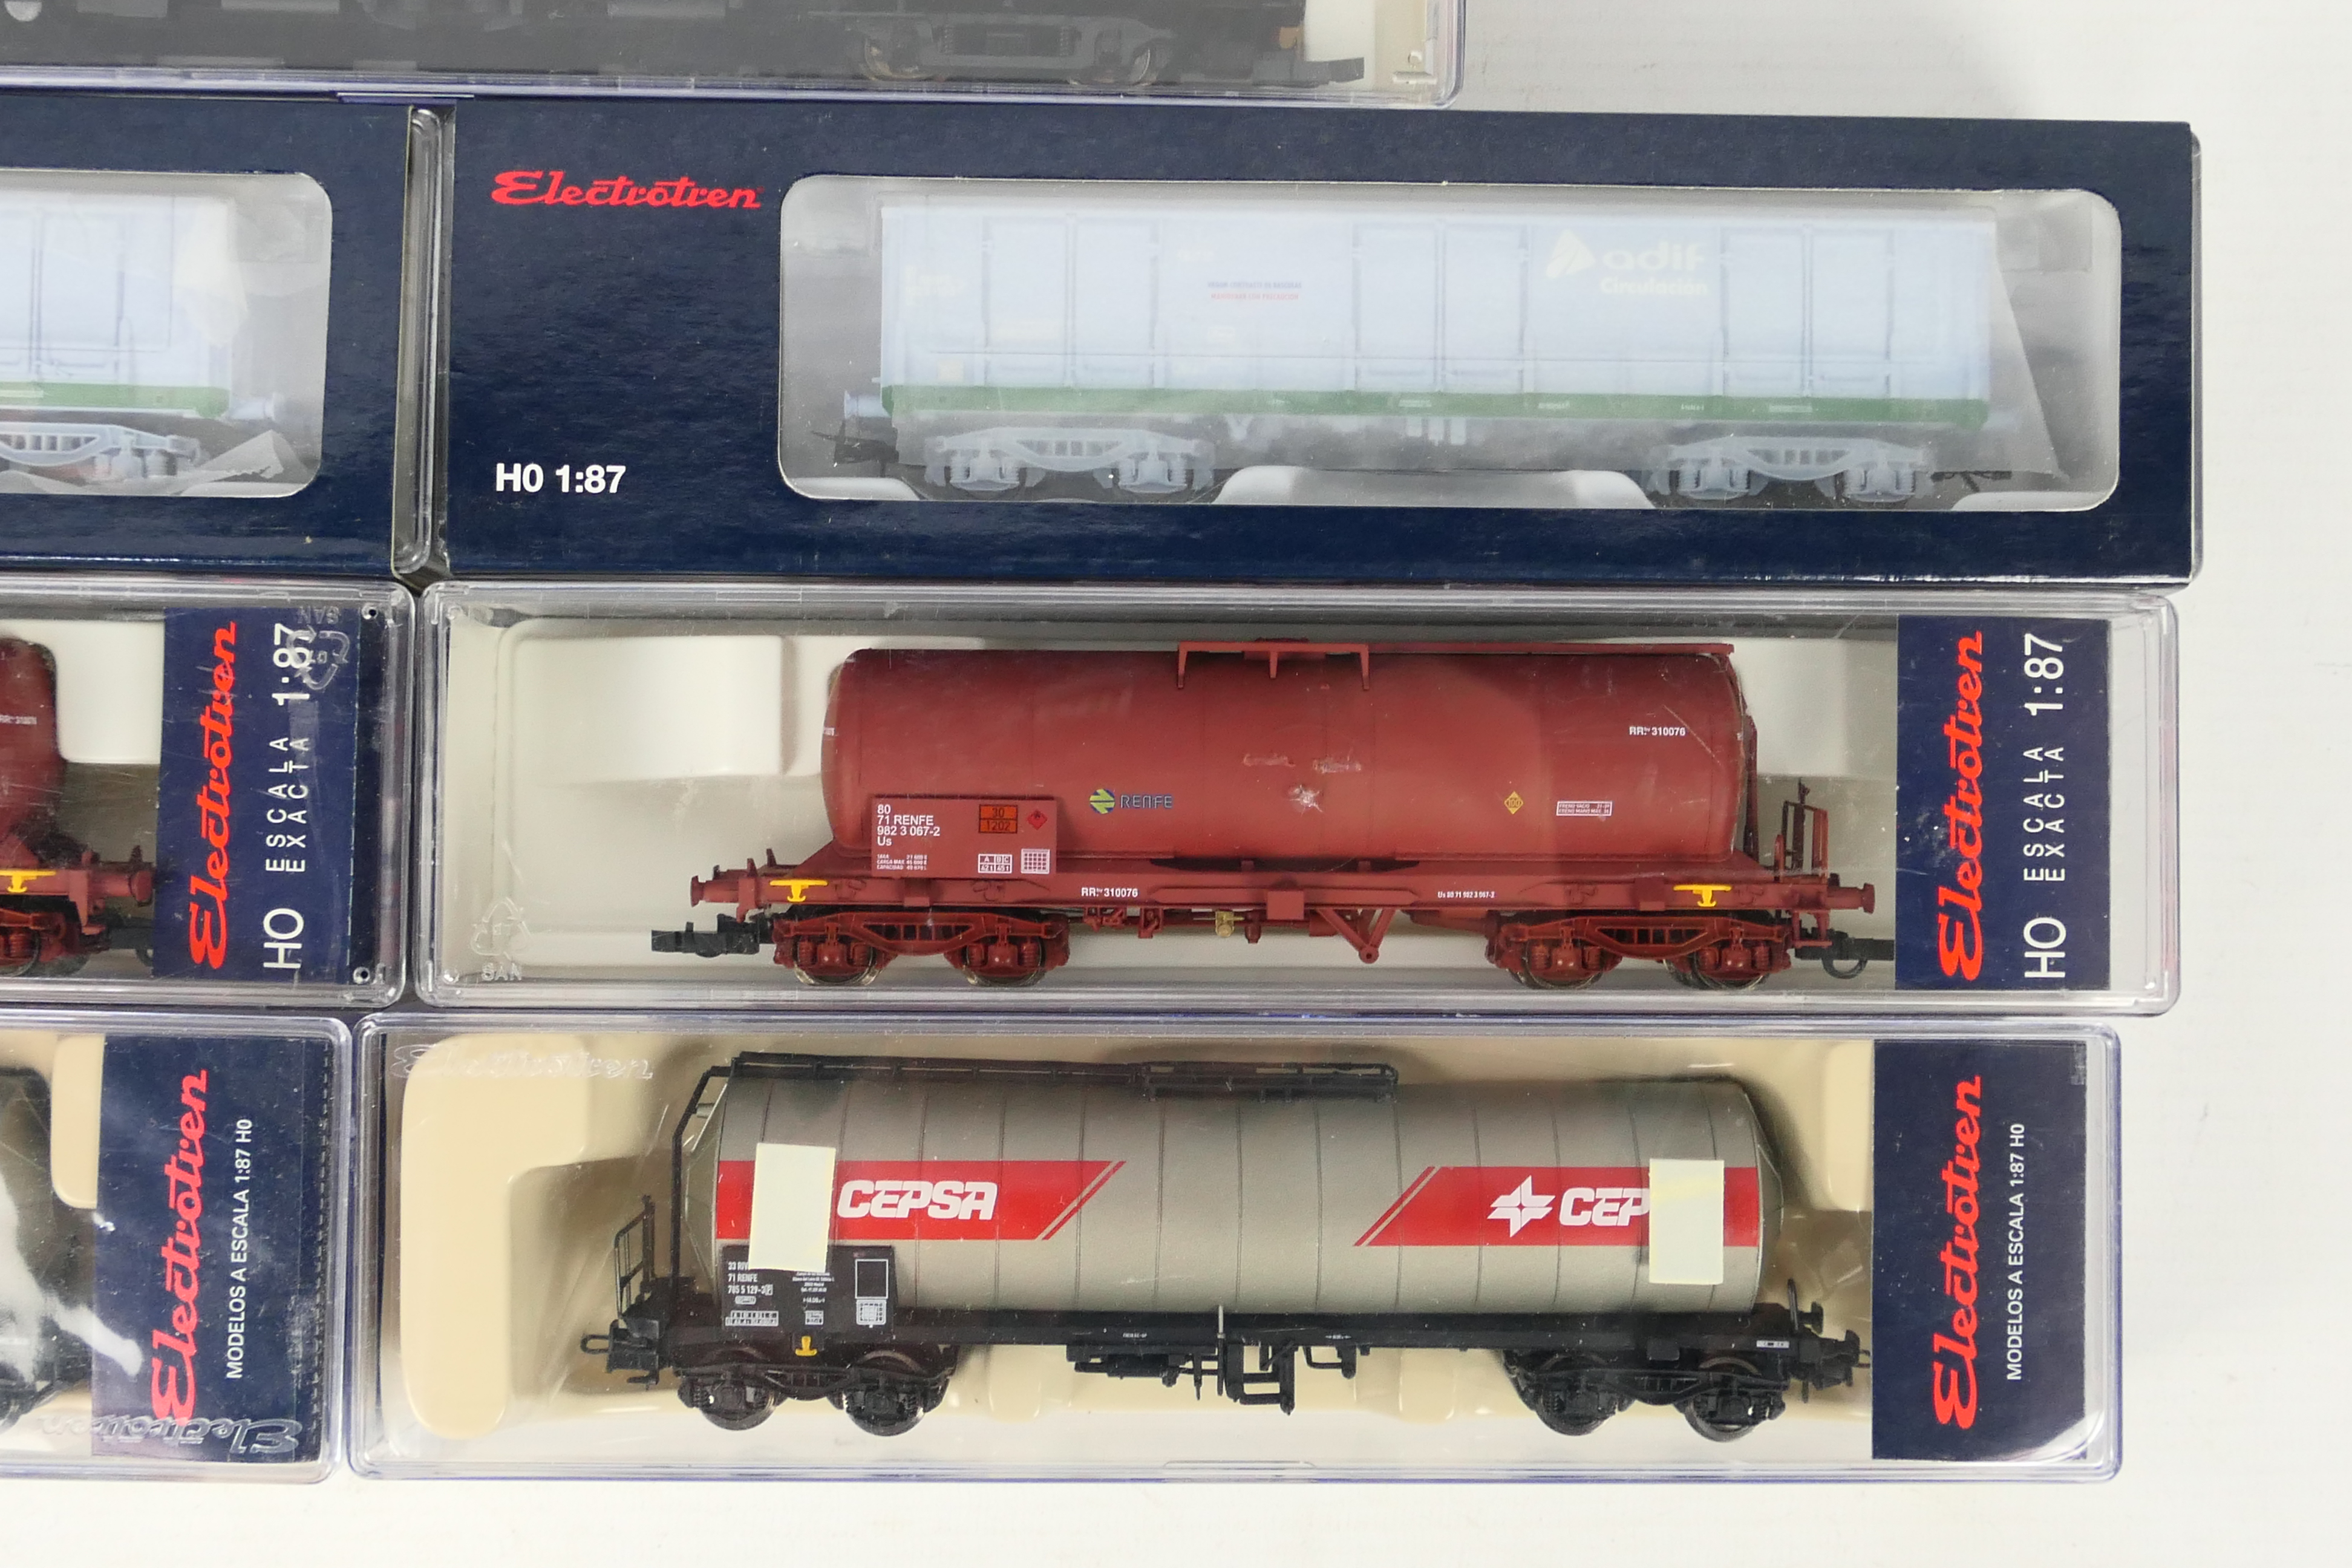 Electrotren - A rake of seven boxed HO gauge Electrotren predominately freight rolling stock items. - Image 3 of 4